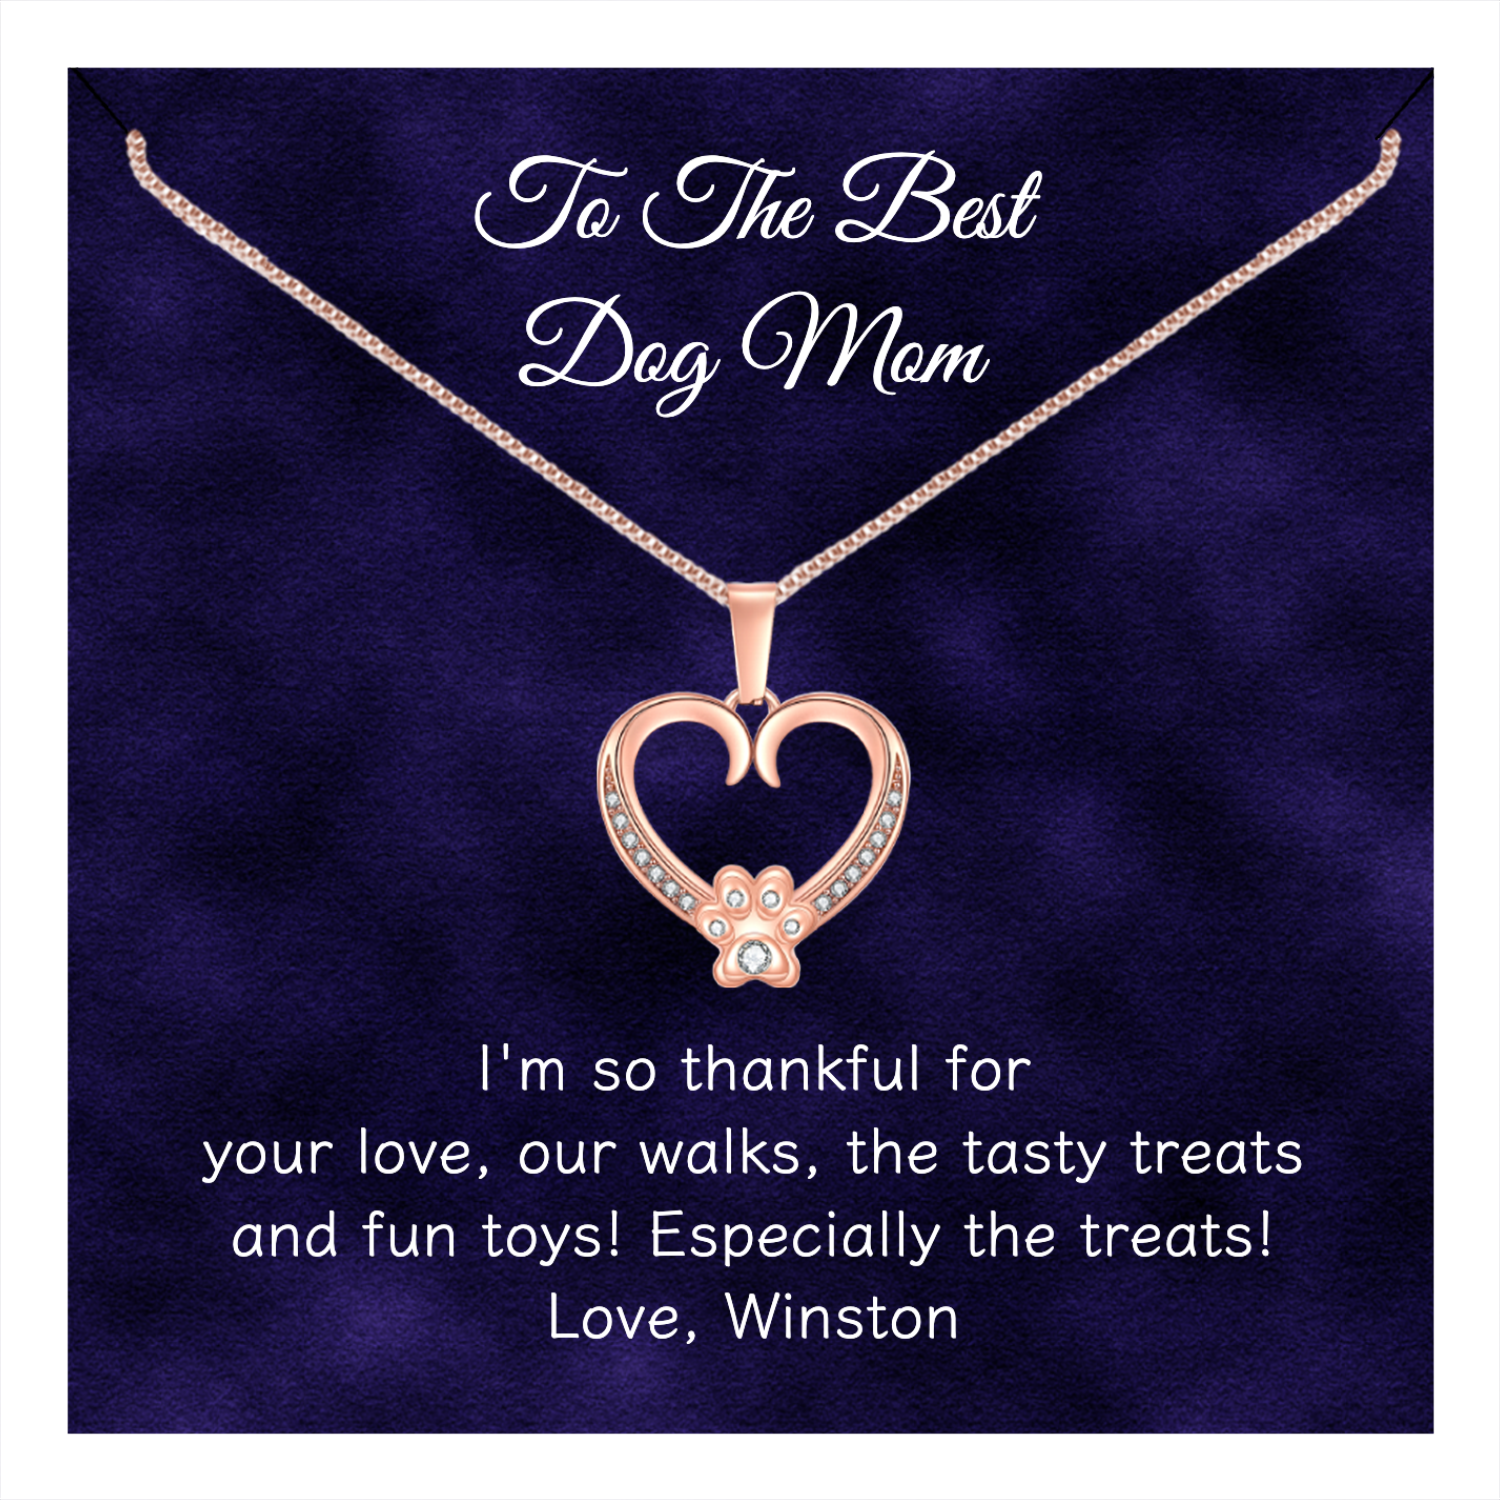 Heart & Paw Print Necklace: A Personalized Token of Love - PuppyJo 18K Rose Gold Paw Heart With Message Card